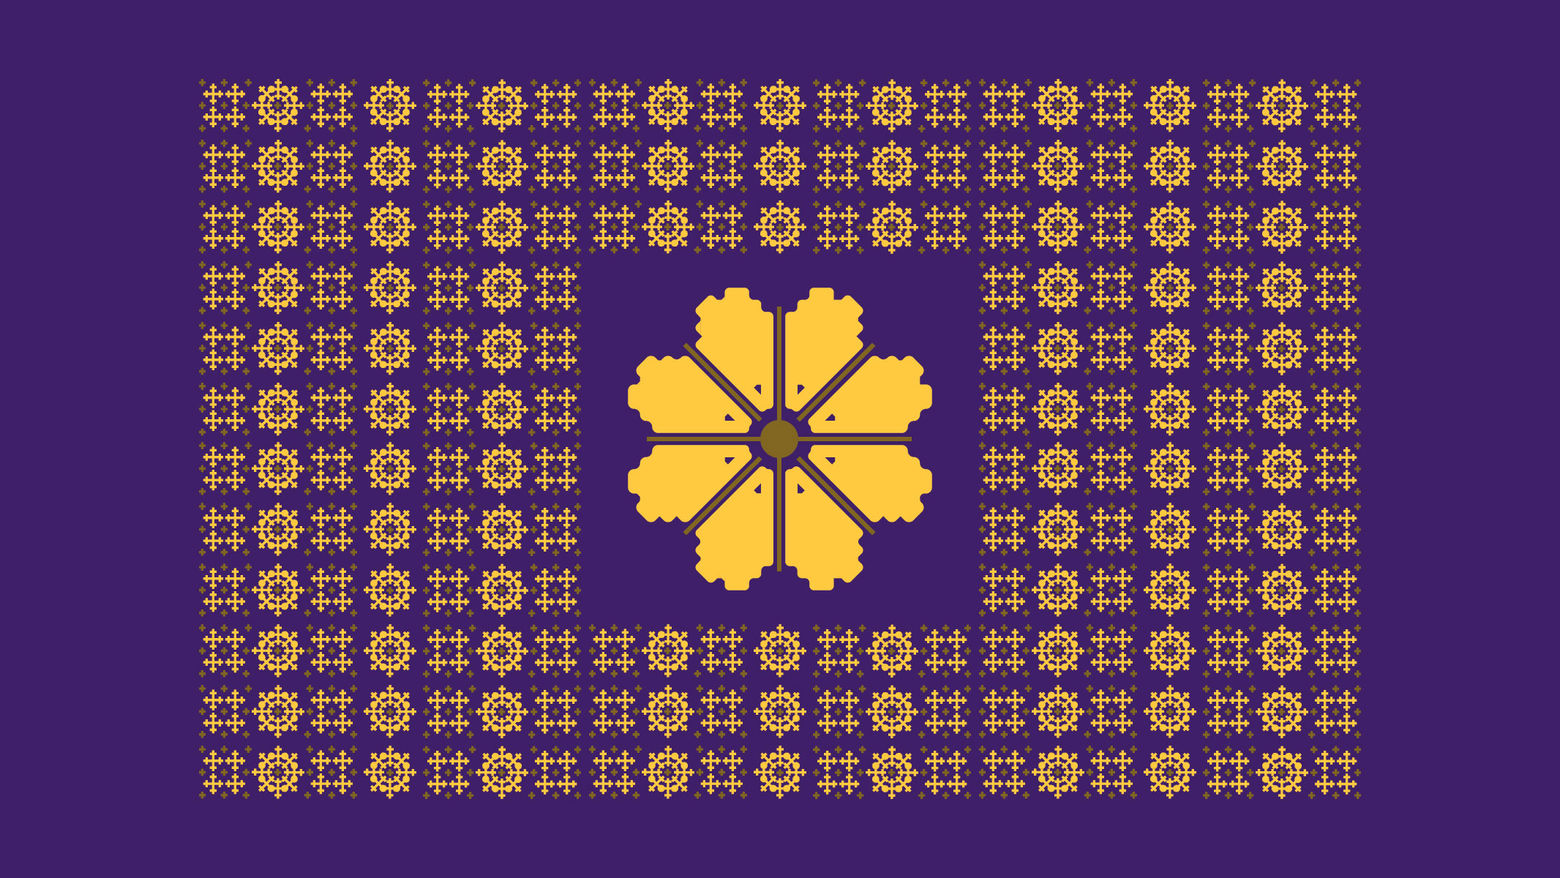 The image is a colorful patterned surface with the content "精靈" written on it. The tags associated with the image are flower, yellow, and screenshot.